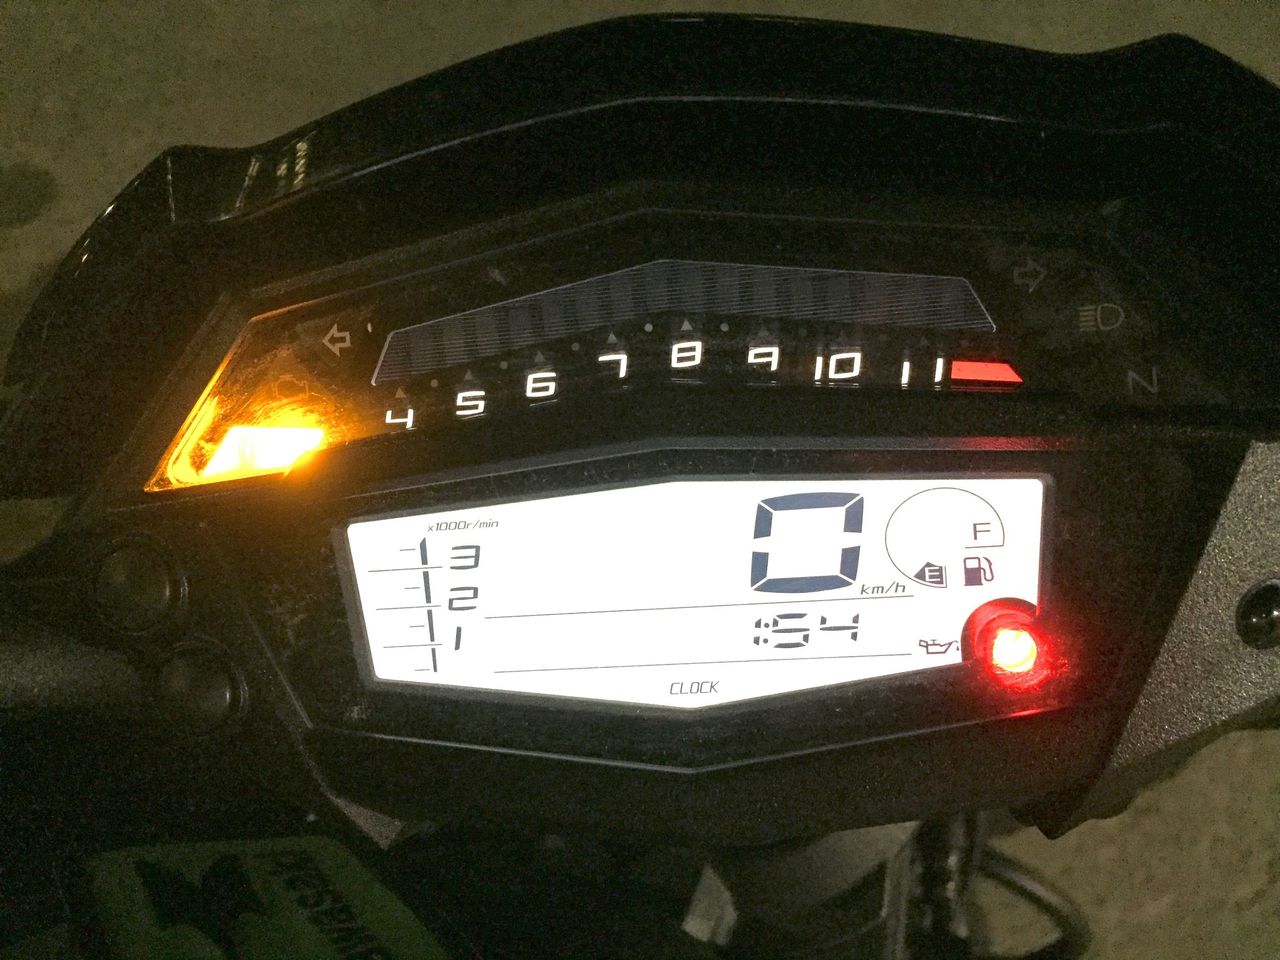 2016 Kawasaki Z1000: ABS is the only electronic intervention.